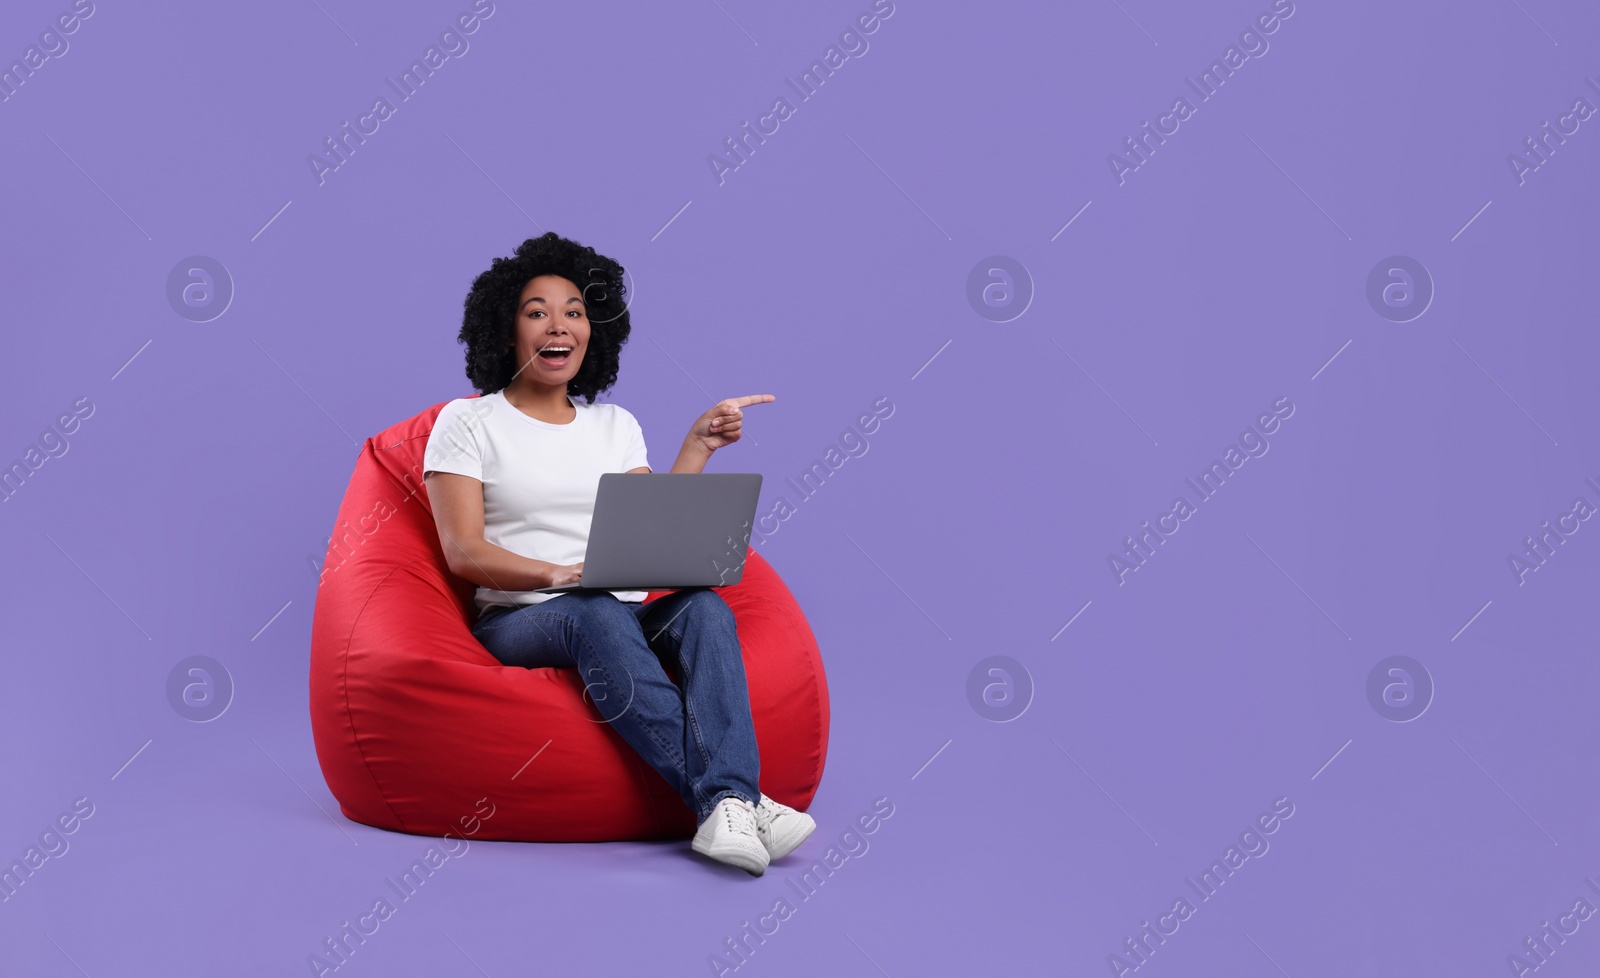 Photo of Happy young woman with laptop sitting on beanbag chair against purple background. Space for text